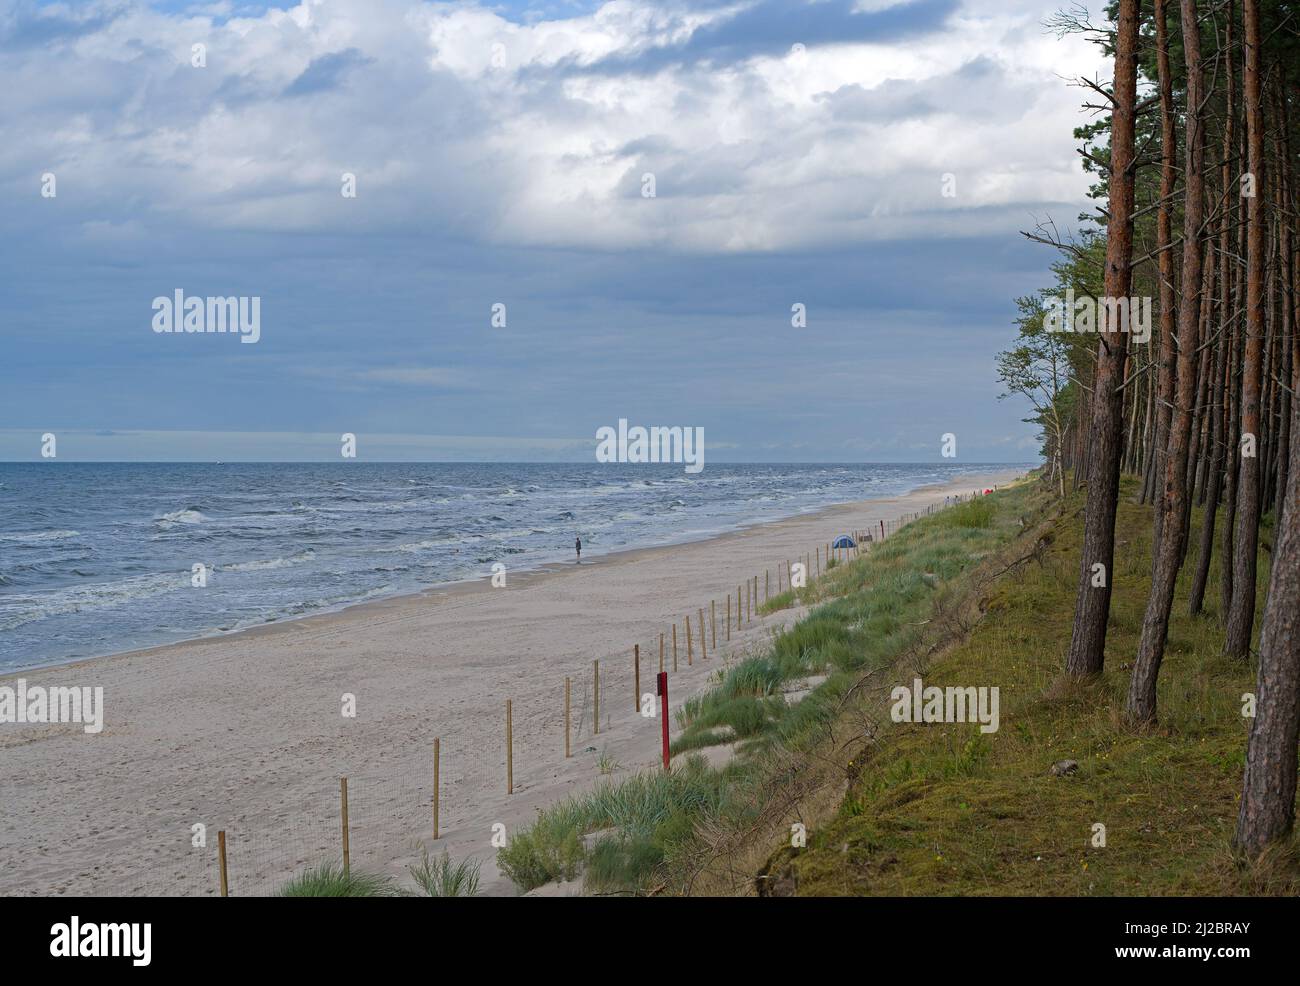 Steep bank and pine forest on the beach of the Baltic Sea coastline, Poland. Stock Photo